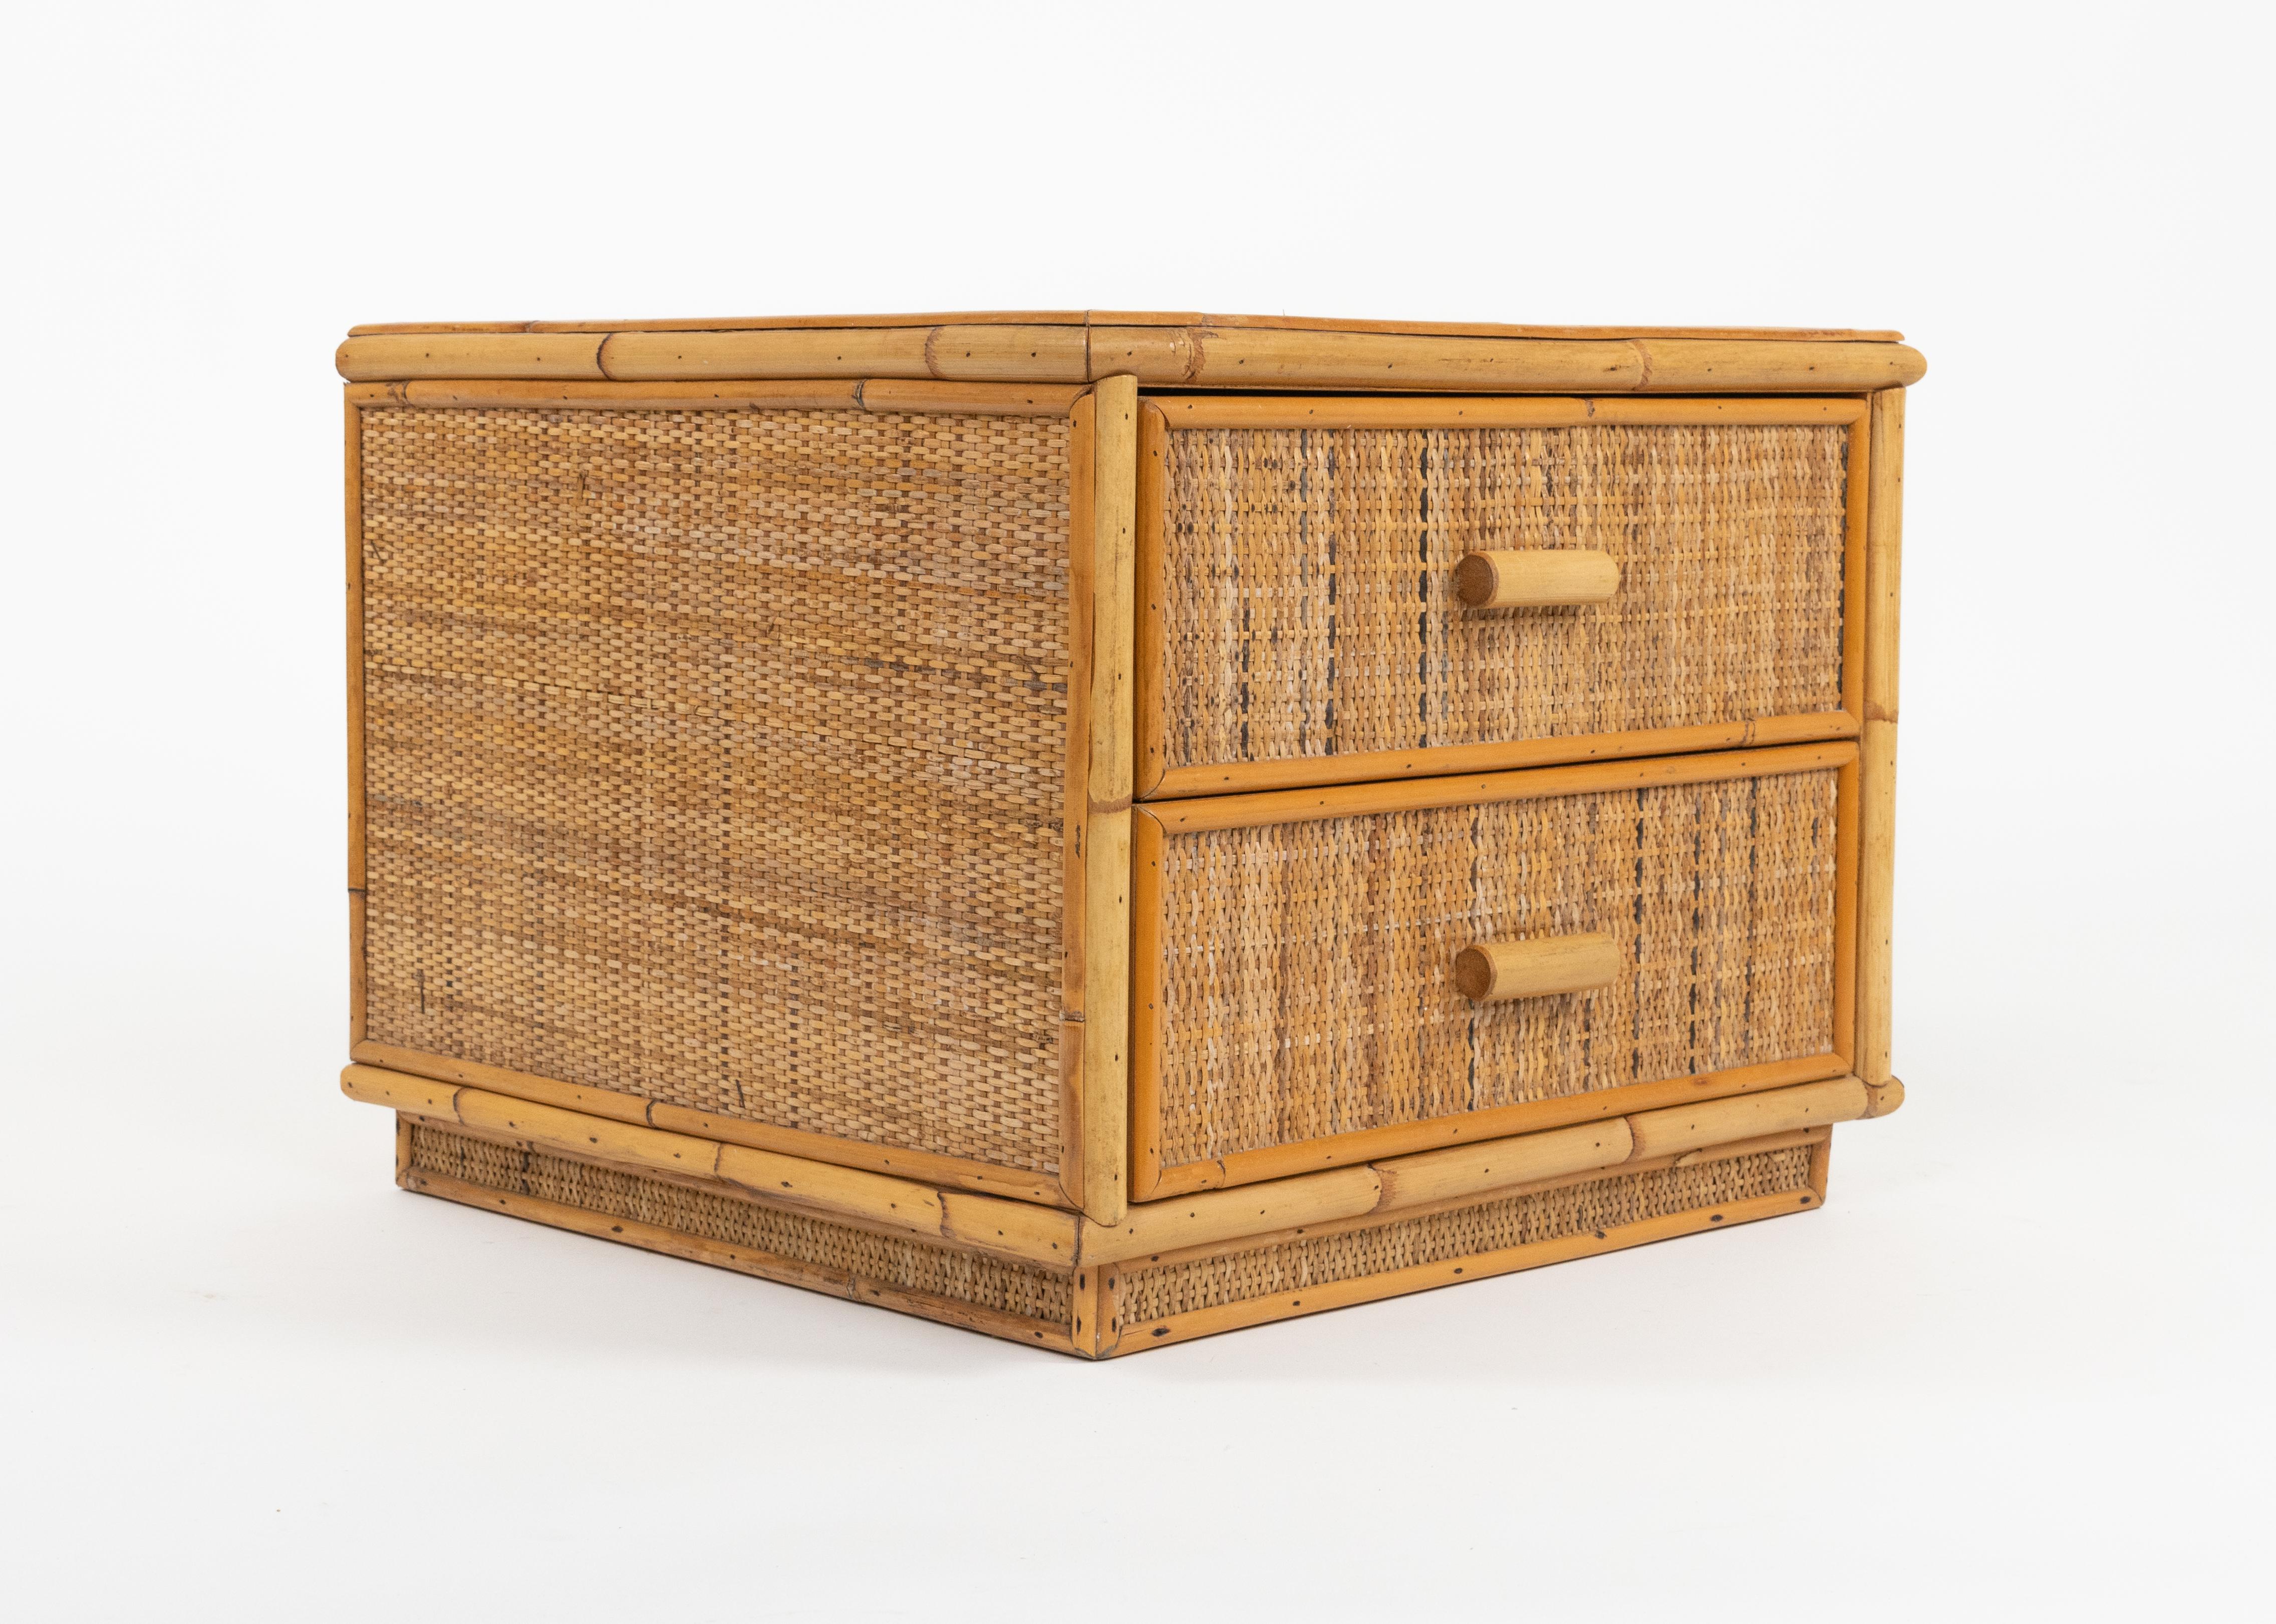 Bamboo and Rattan Pair of Bedside Tables Nightstands Dal Vera Style, Italy 1970s For Sale 4